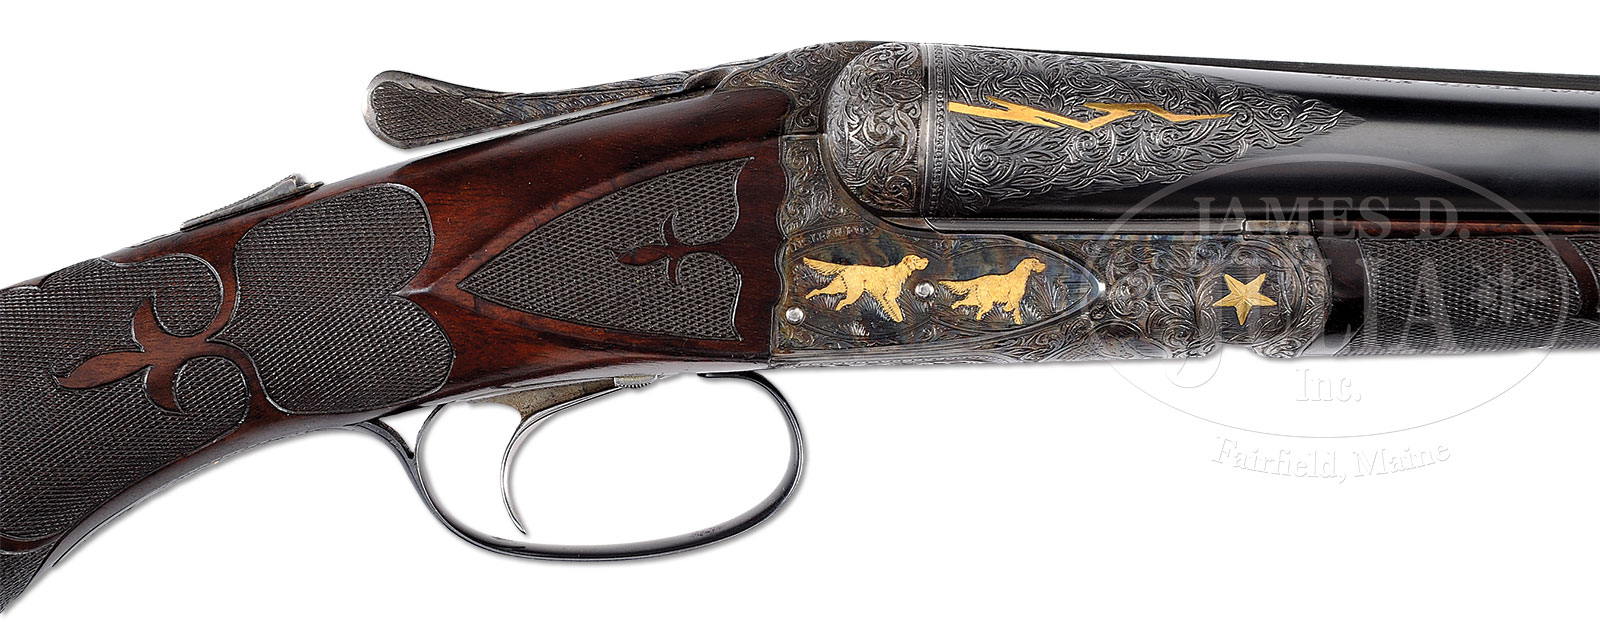 EXTREMELY RARE A. H. FOX “FE” SHOTGUN WITH DOUBLE DOG GOLD INLAYS, USED BY FOX AS AN “EXHIBITION” GUN WITH CLARK LETTER.